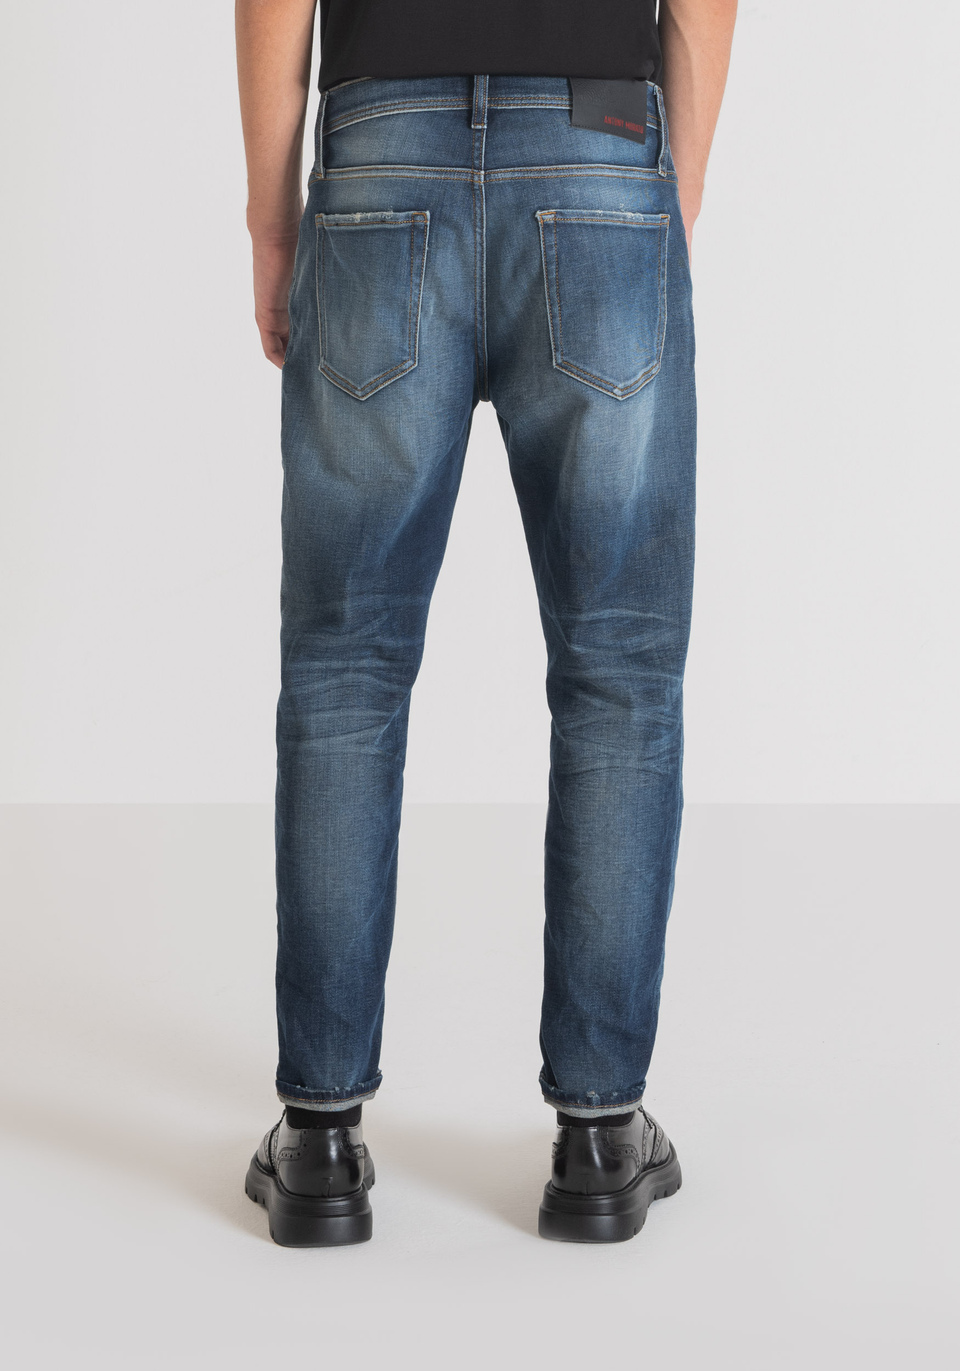 "ARGON" SLIM FIT JEANS IN COMFORT DENIM WITH TAPERED ANKLE - Antony Morato Online Shop